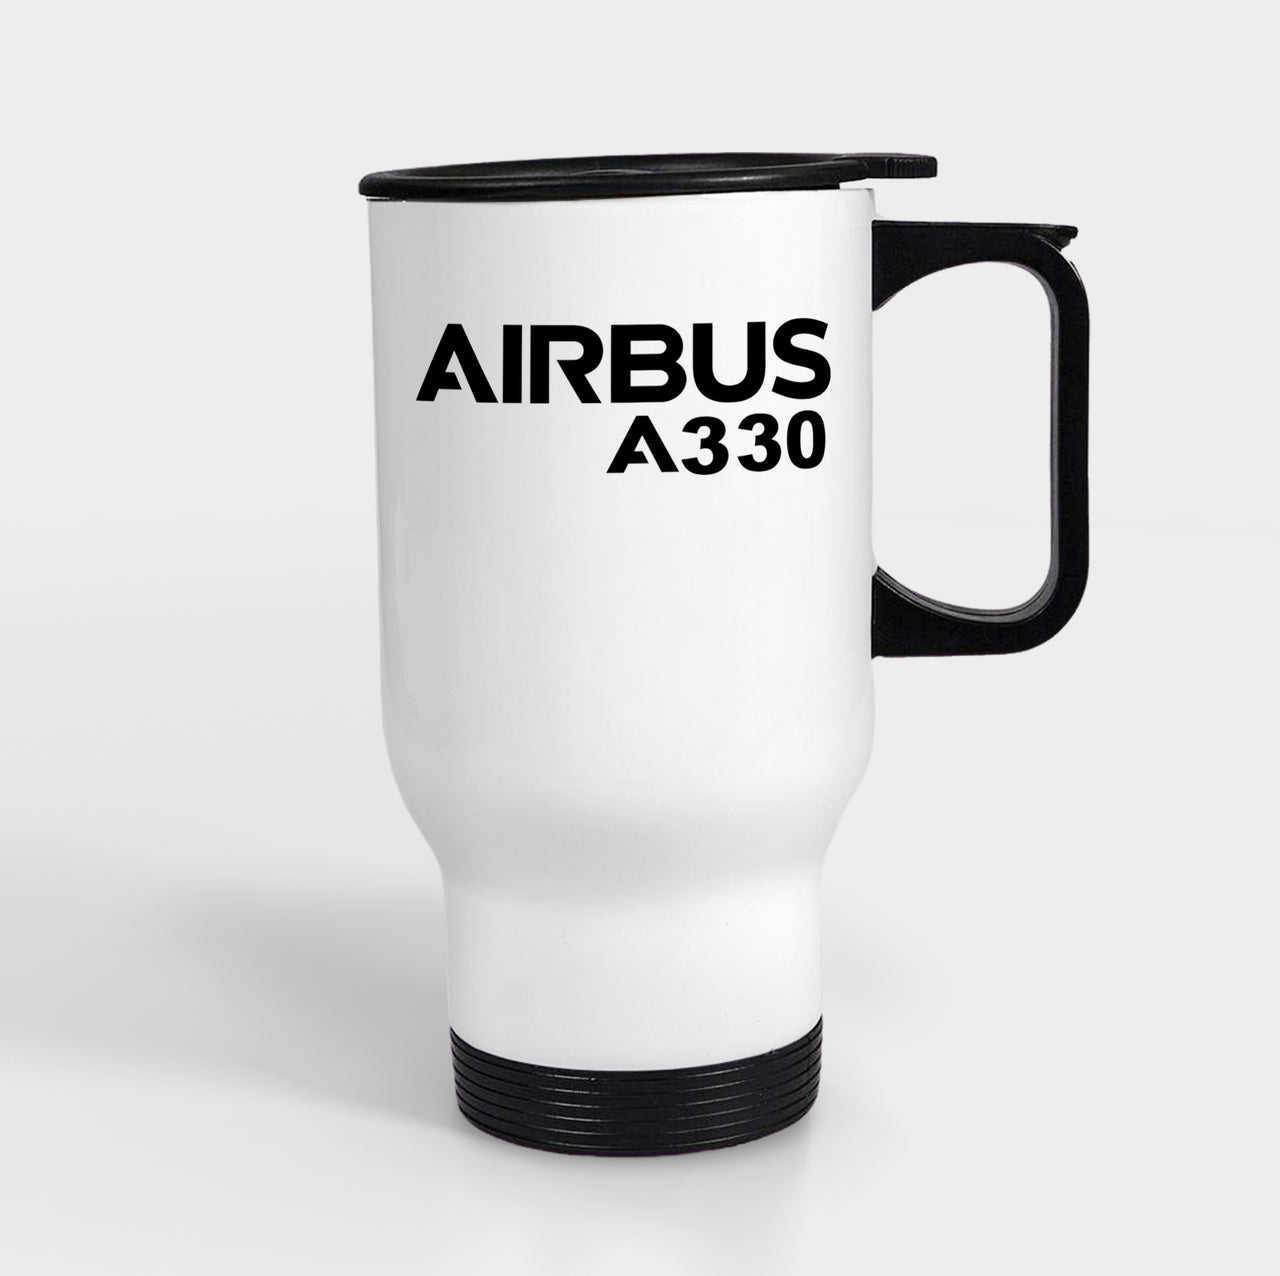 Airbus A330 & Text Designed Travel Mugs (With Holder)